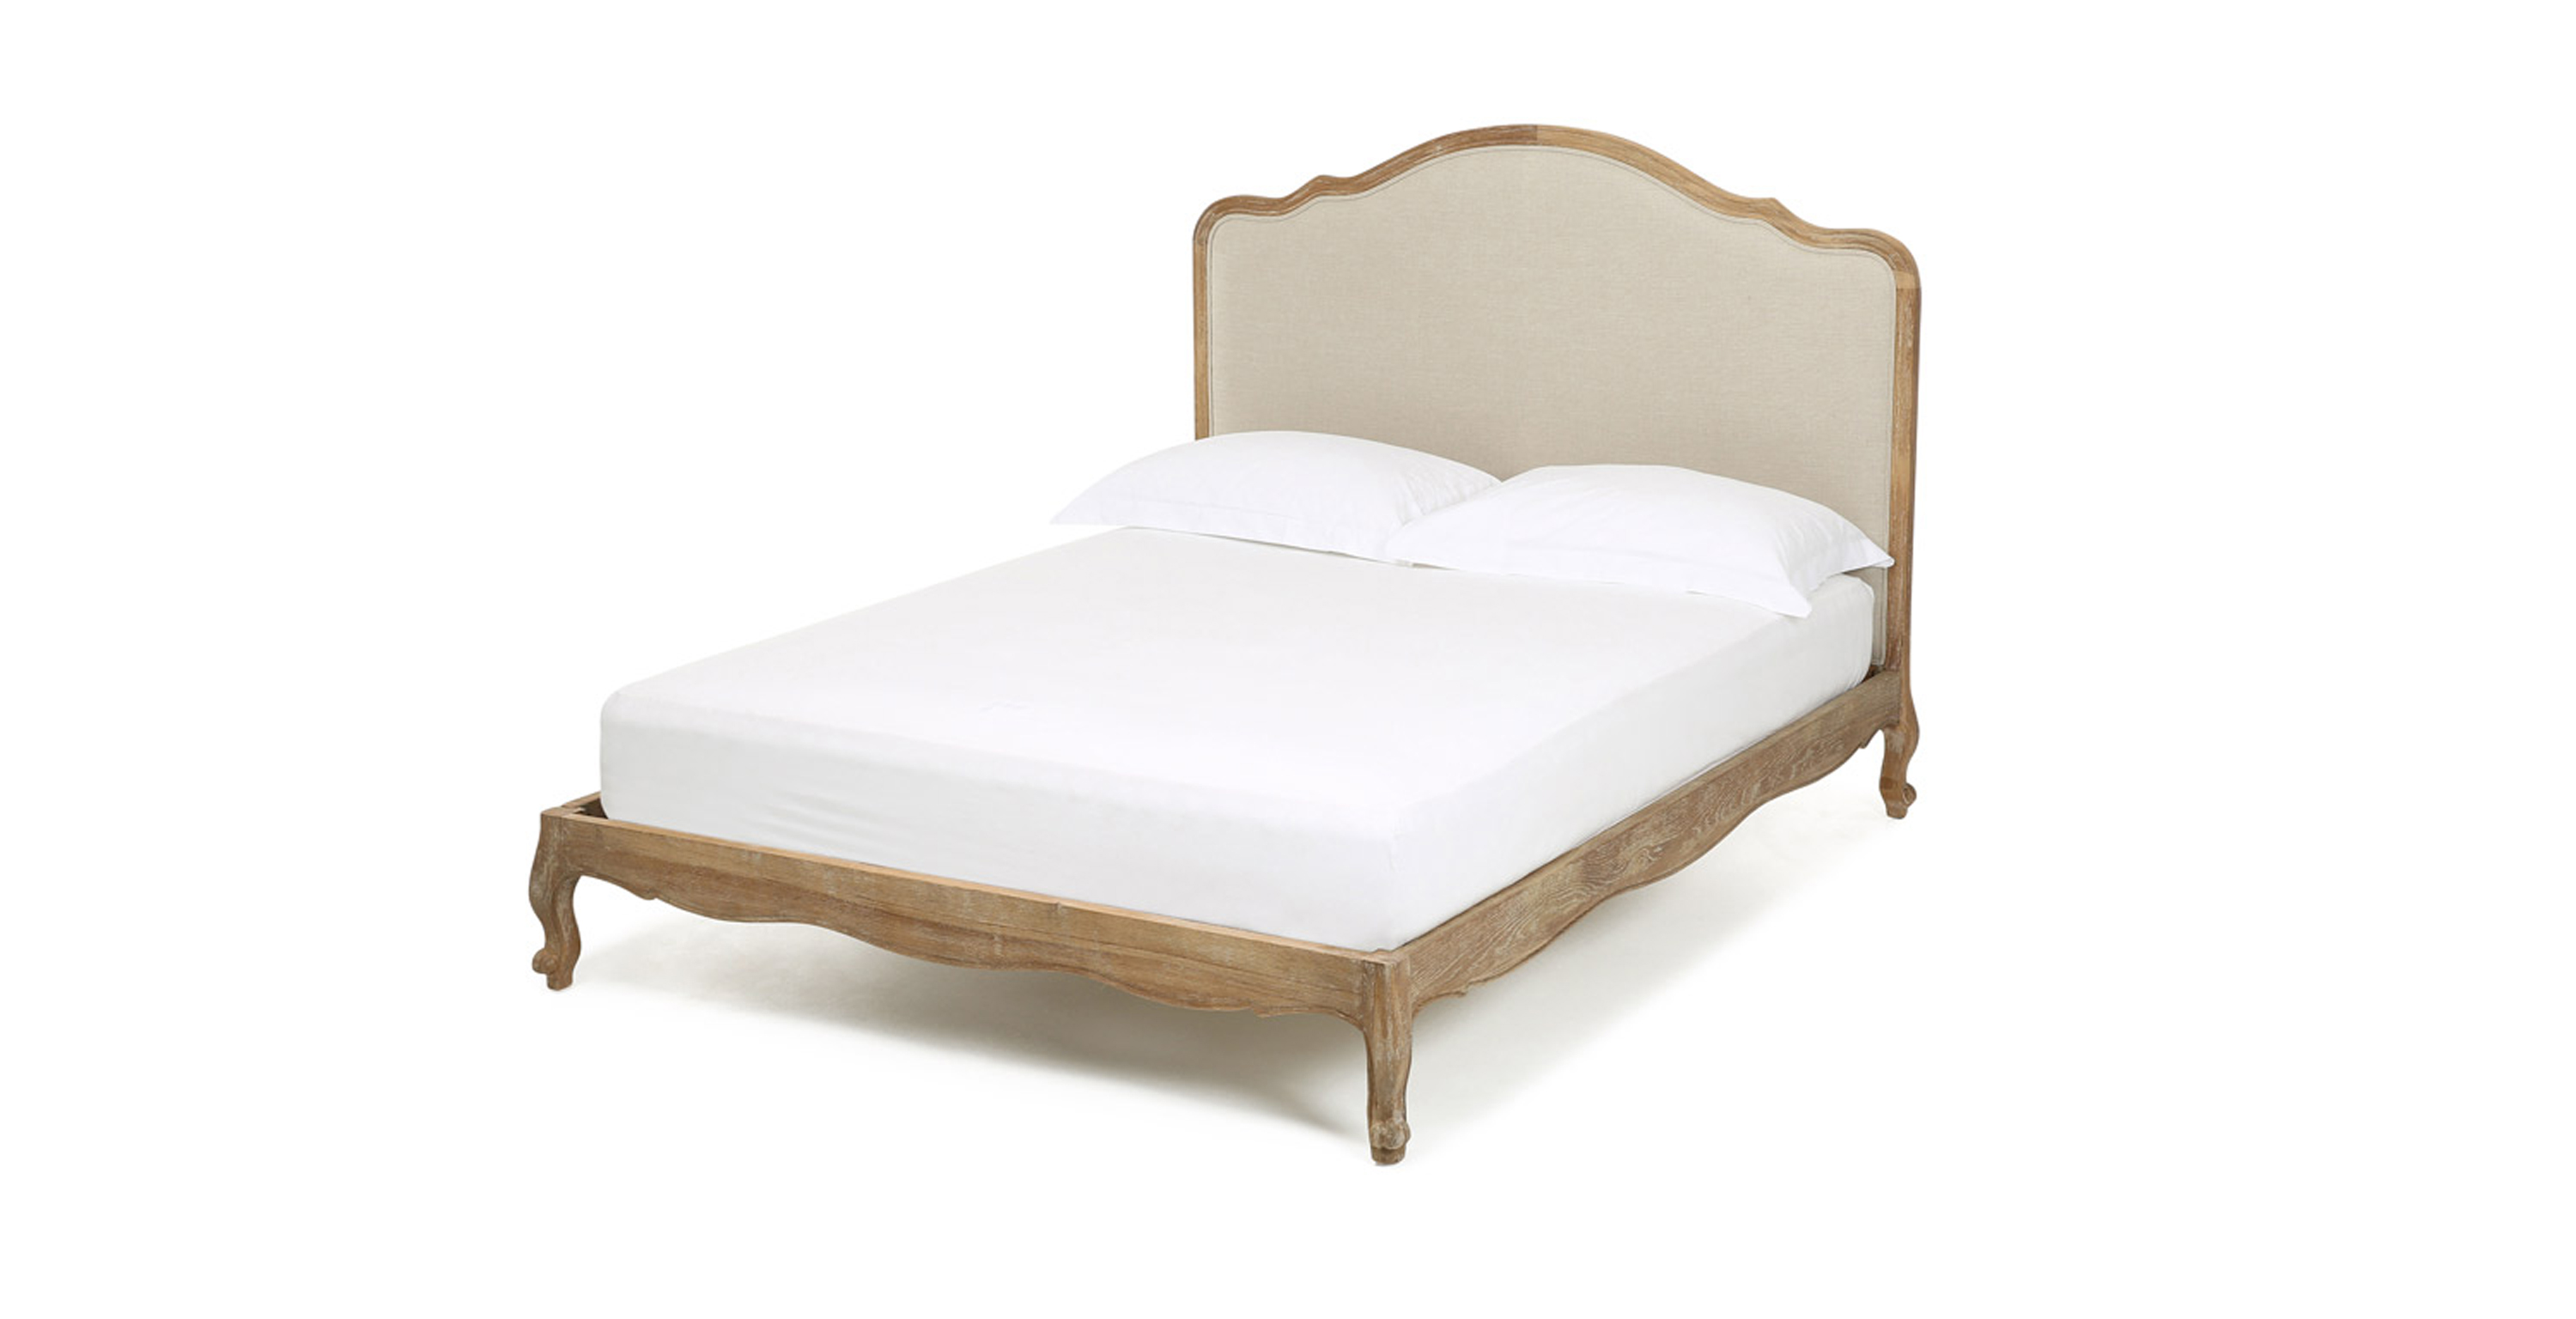 Sienna Bed Double King Super, Extra High King Size Bed Frame